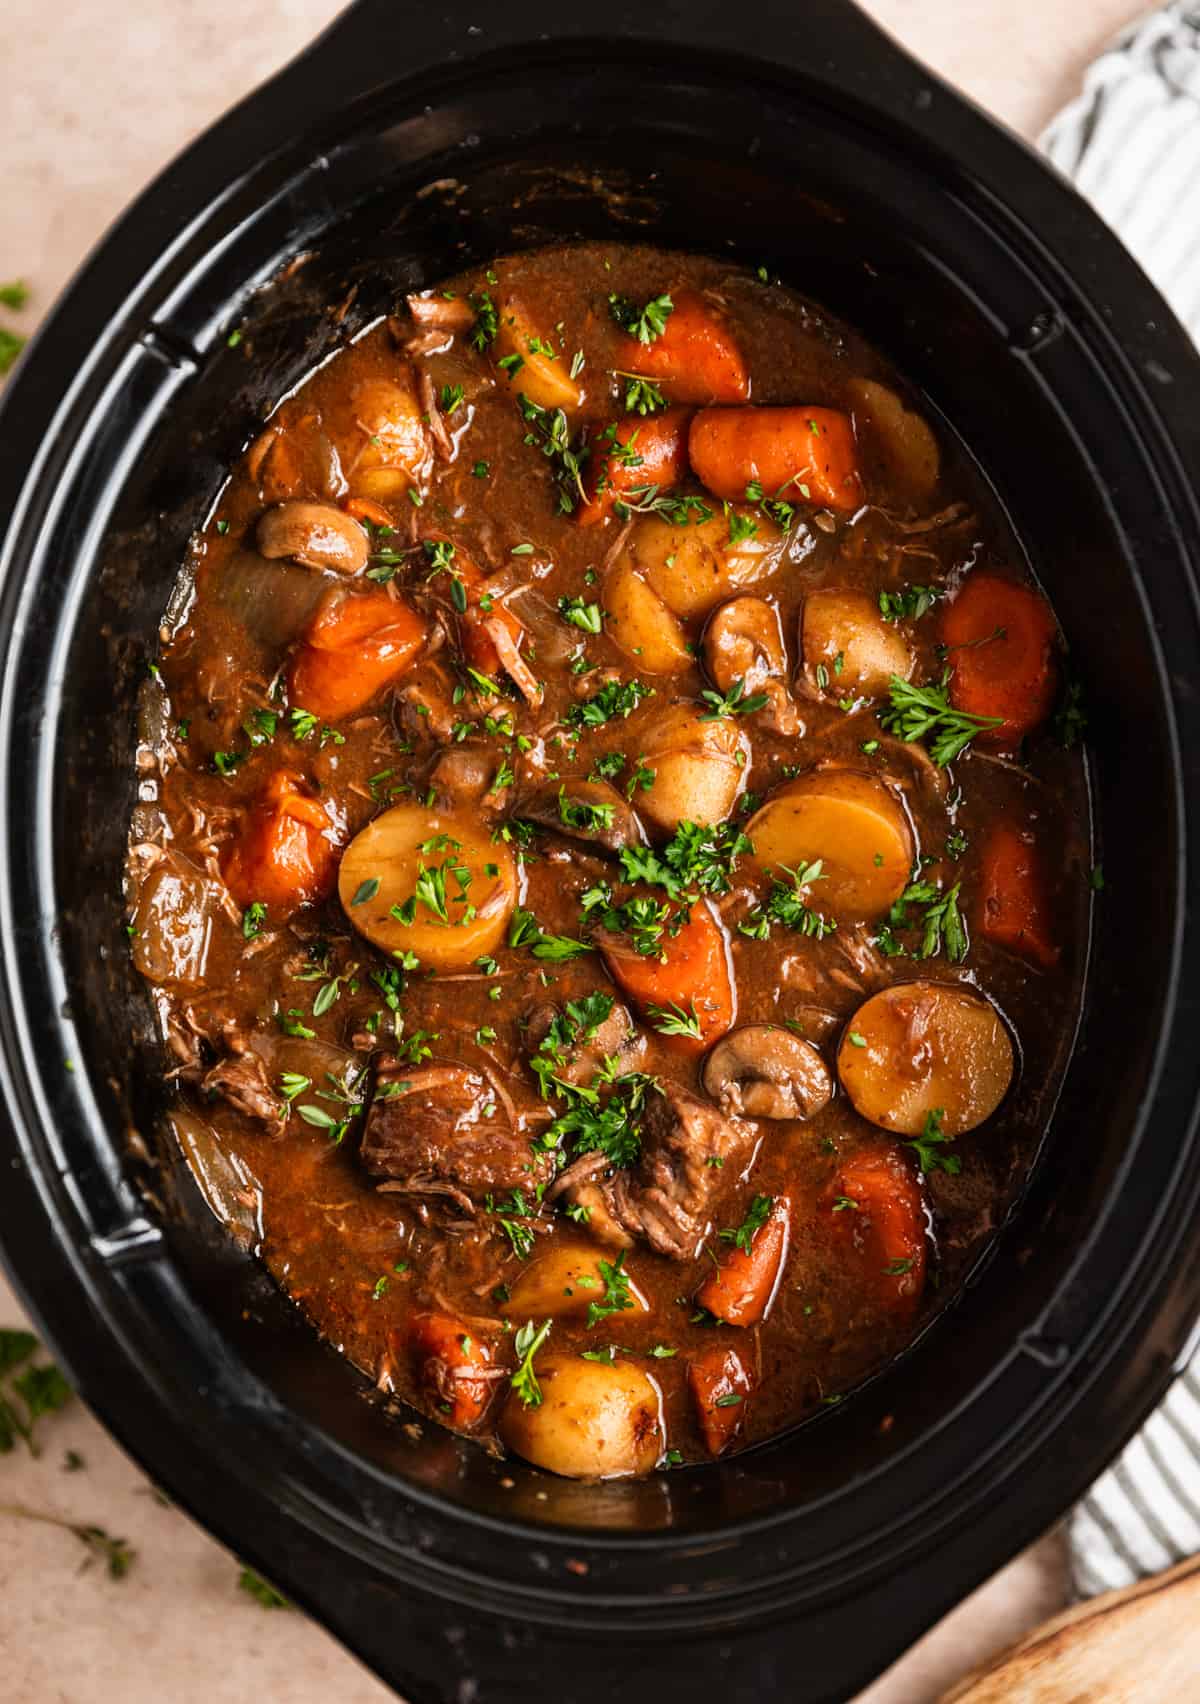 Beef and mushroom stew in slow cooker with potatoes and carrots and topped with parsley.